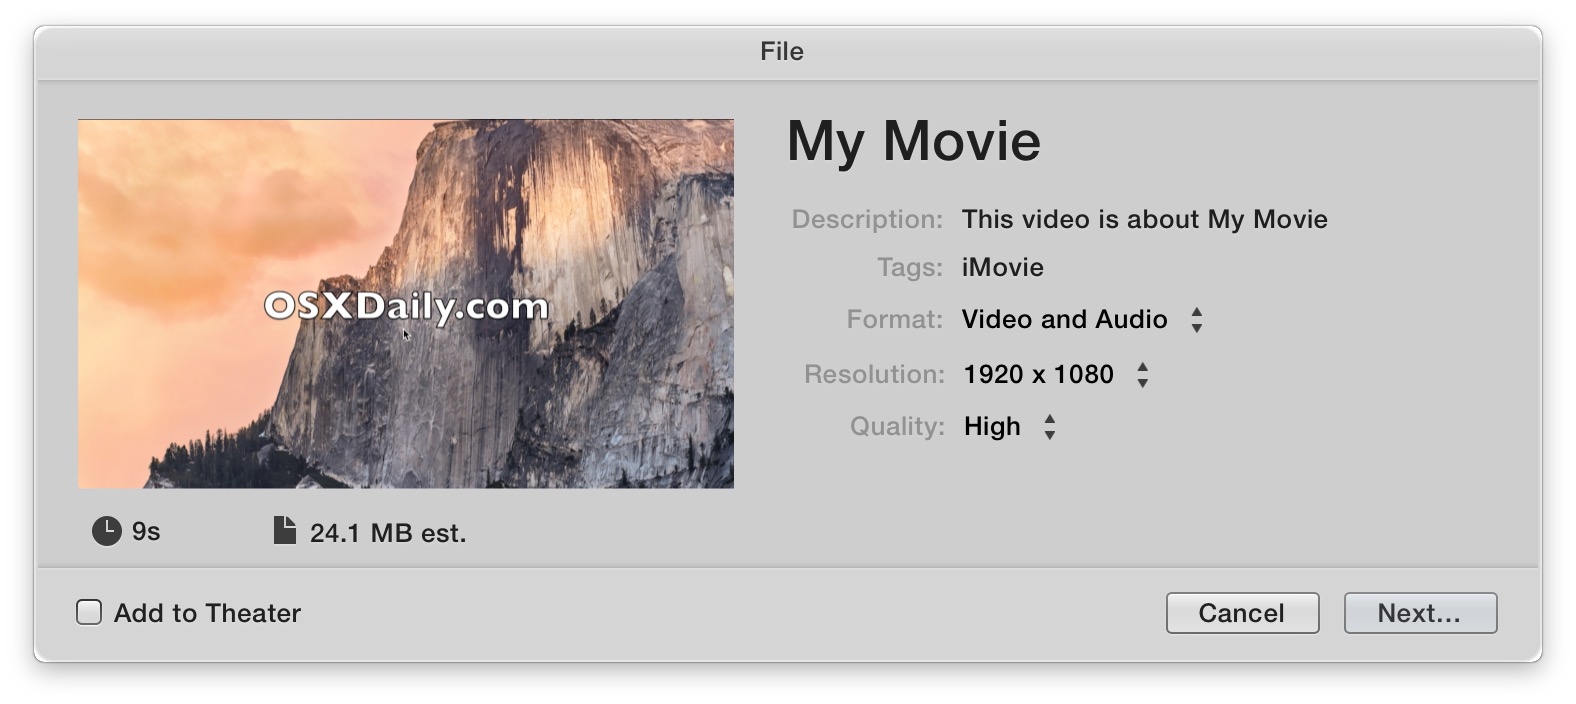 Saving a video with iMovie for Mac OS X is a unique experience of file saving using a Sharing menu